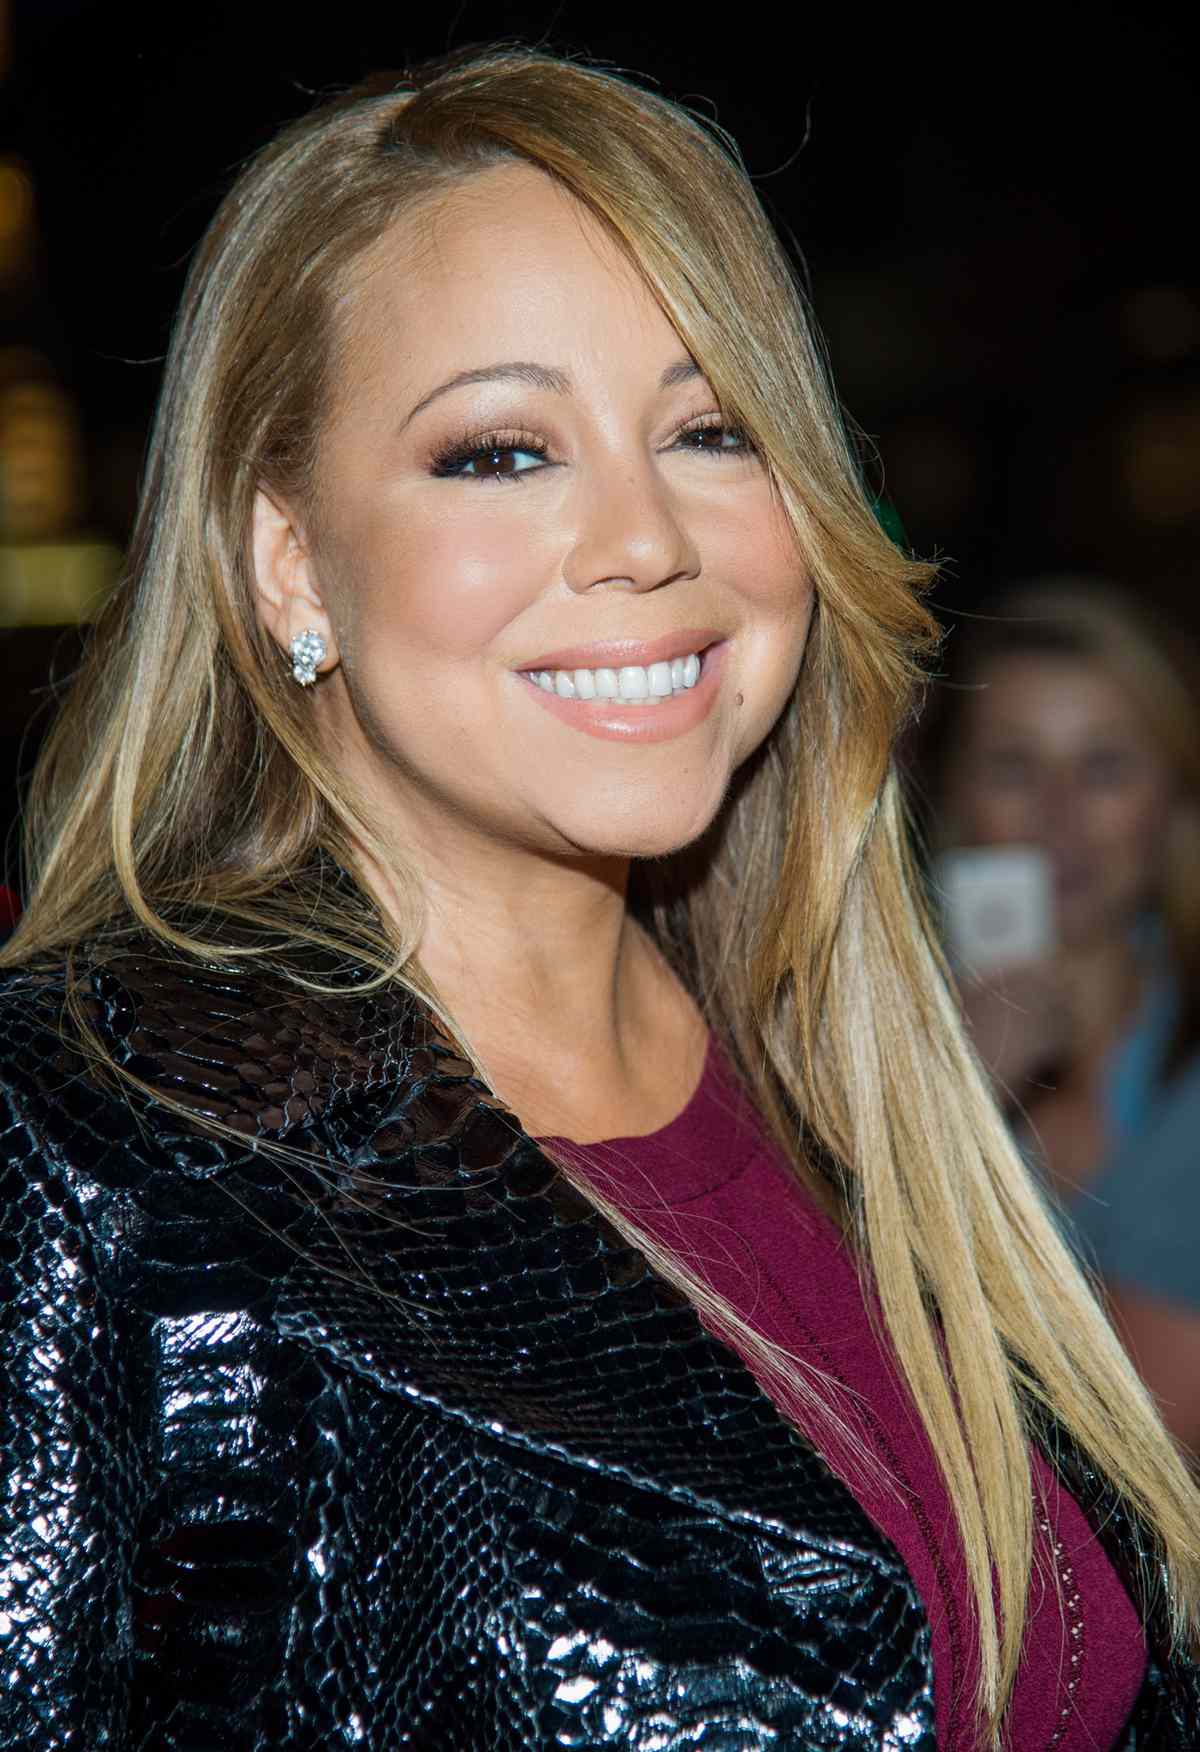 Singer Mariah Carey attends "The Intern" New York Premiere at the Ziegfeld Theater on September 21, 2015 in New York City.